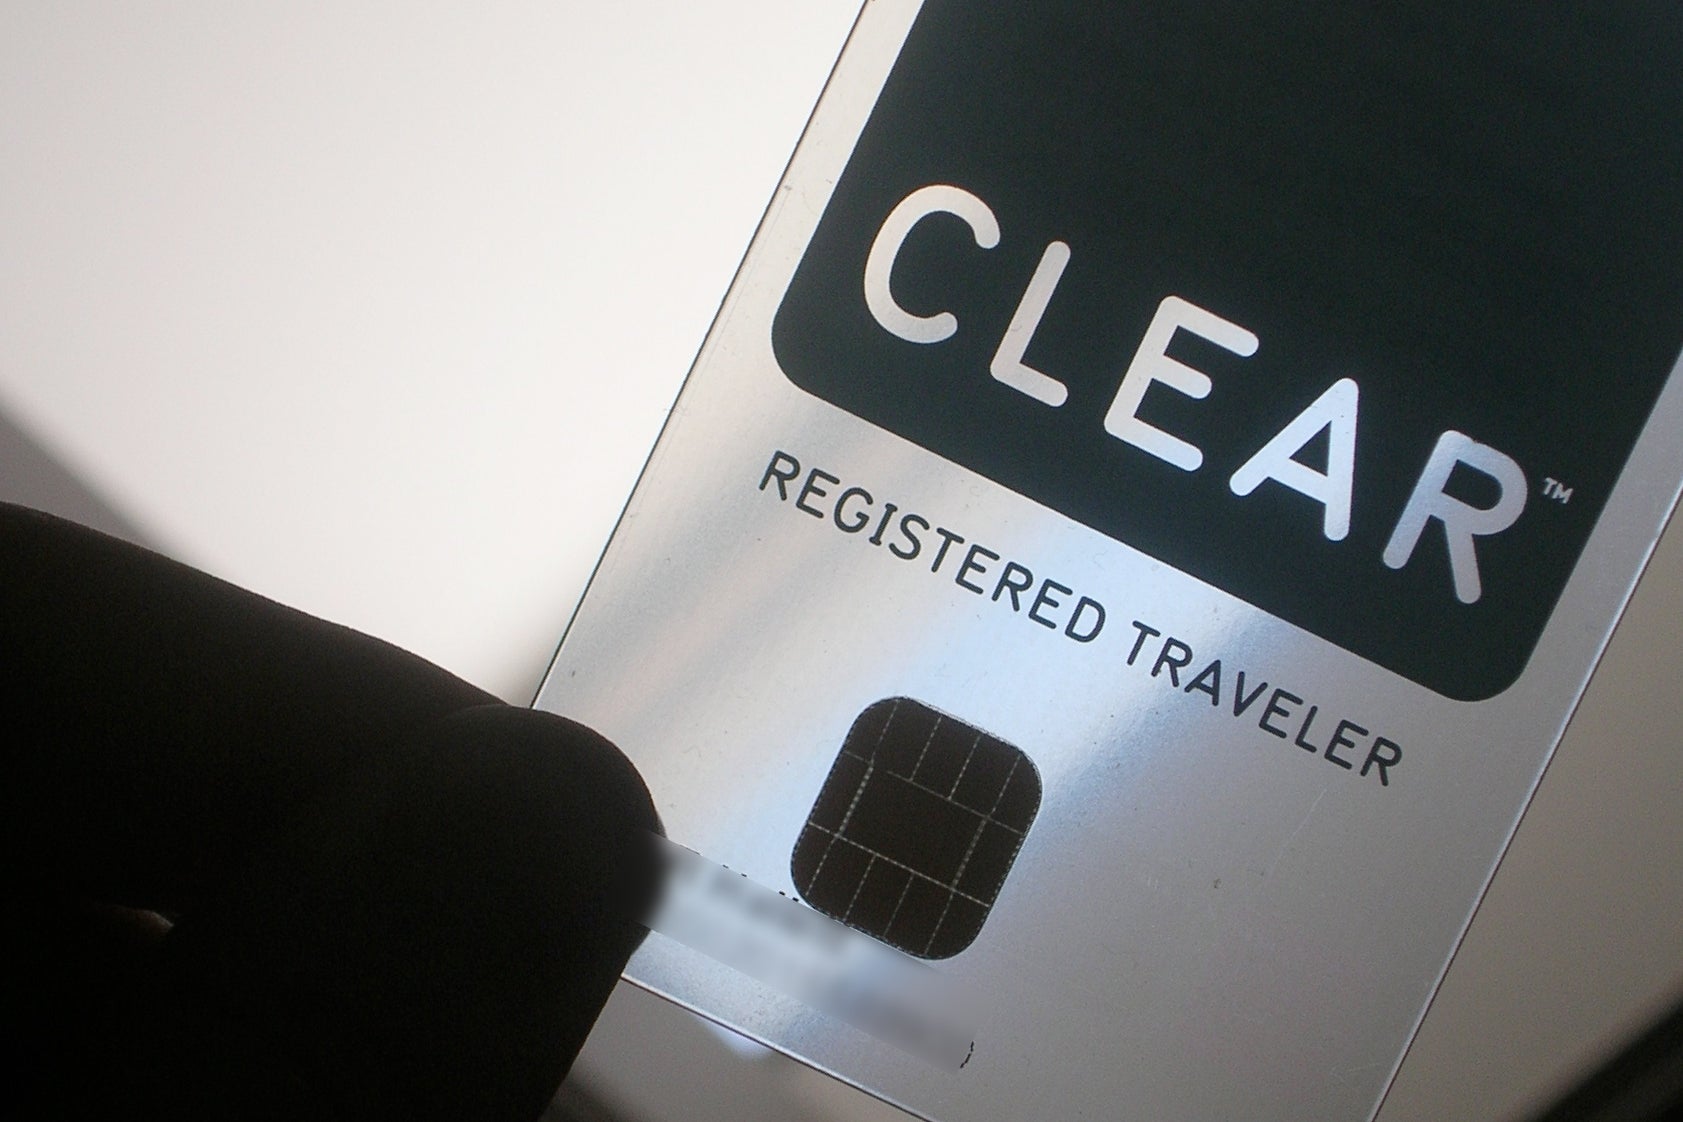 The credit-card-like pass of a Clear registered traveler.